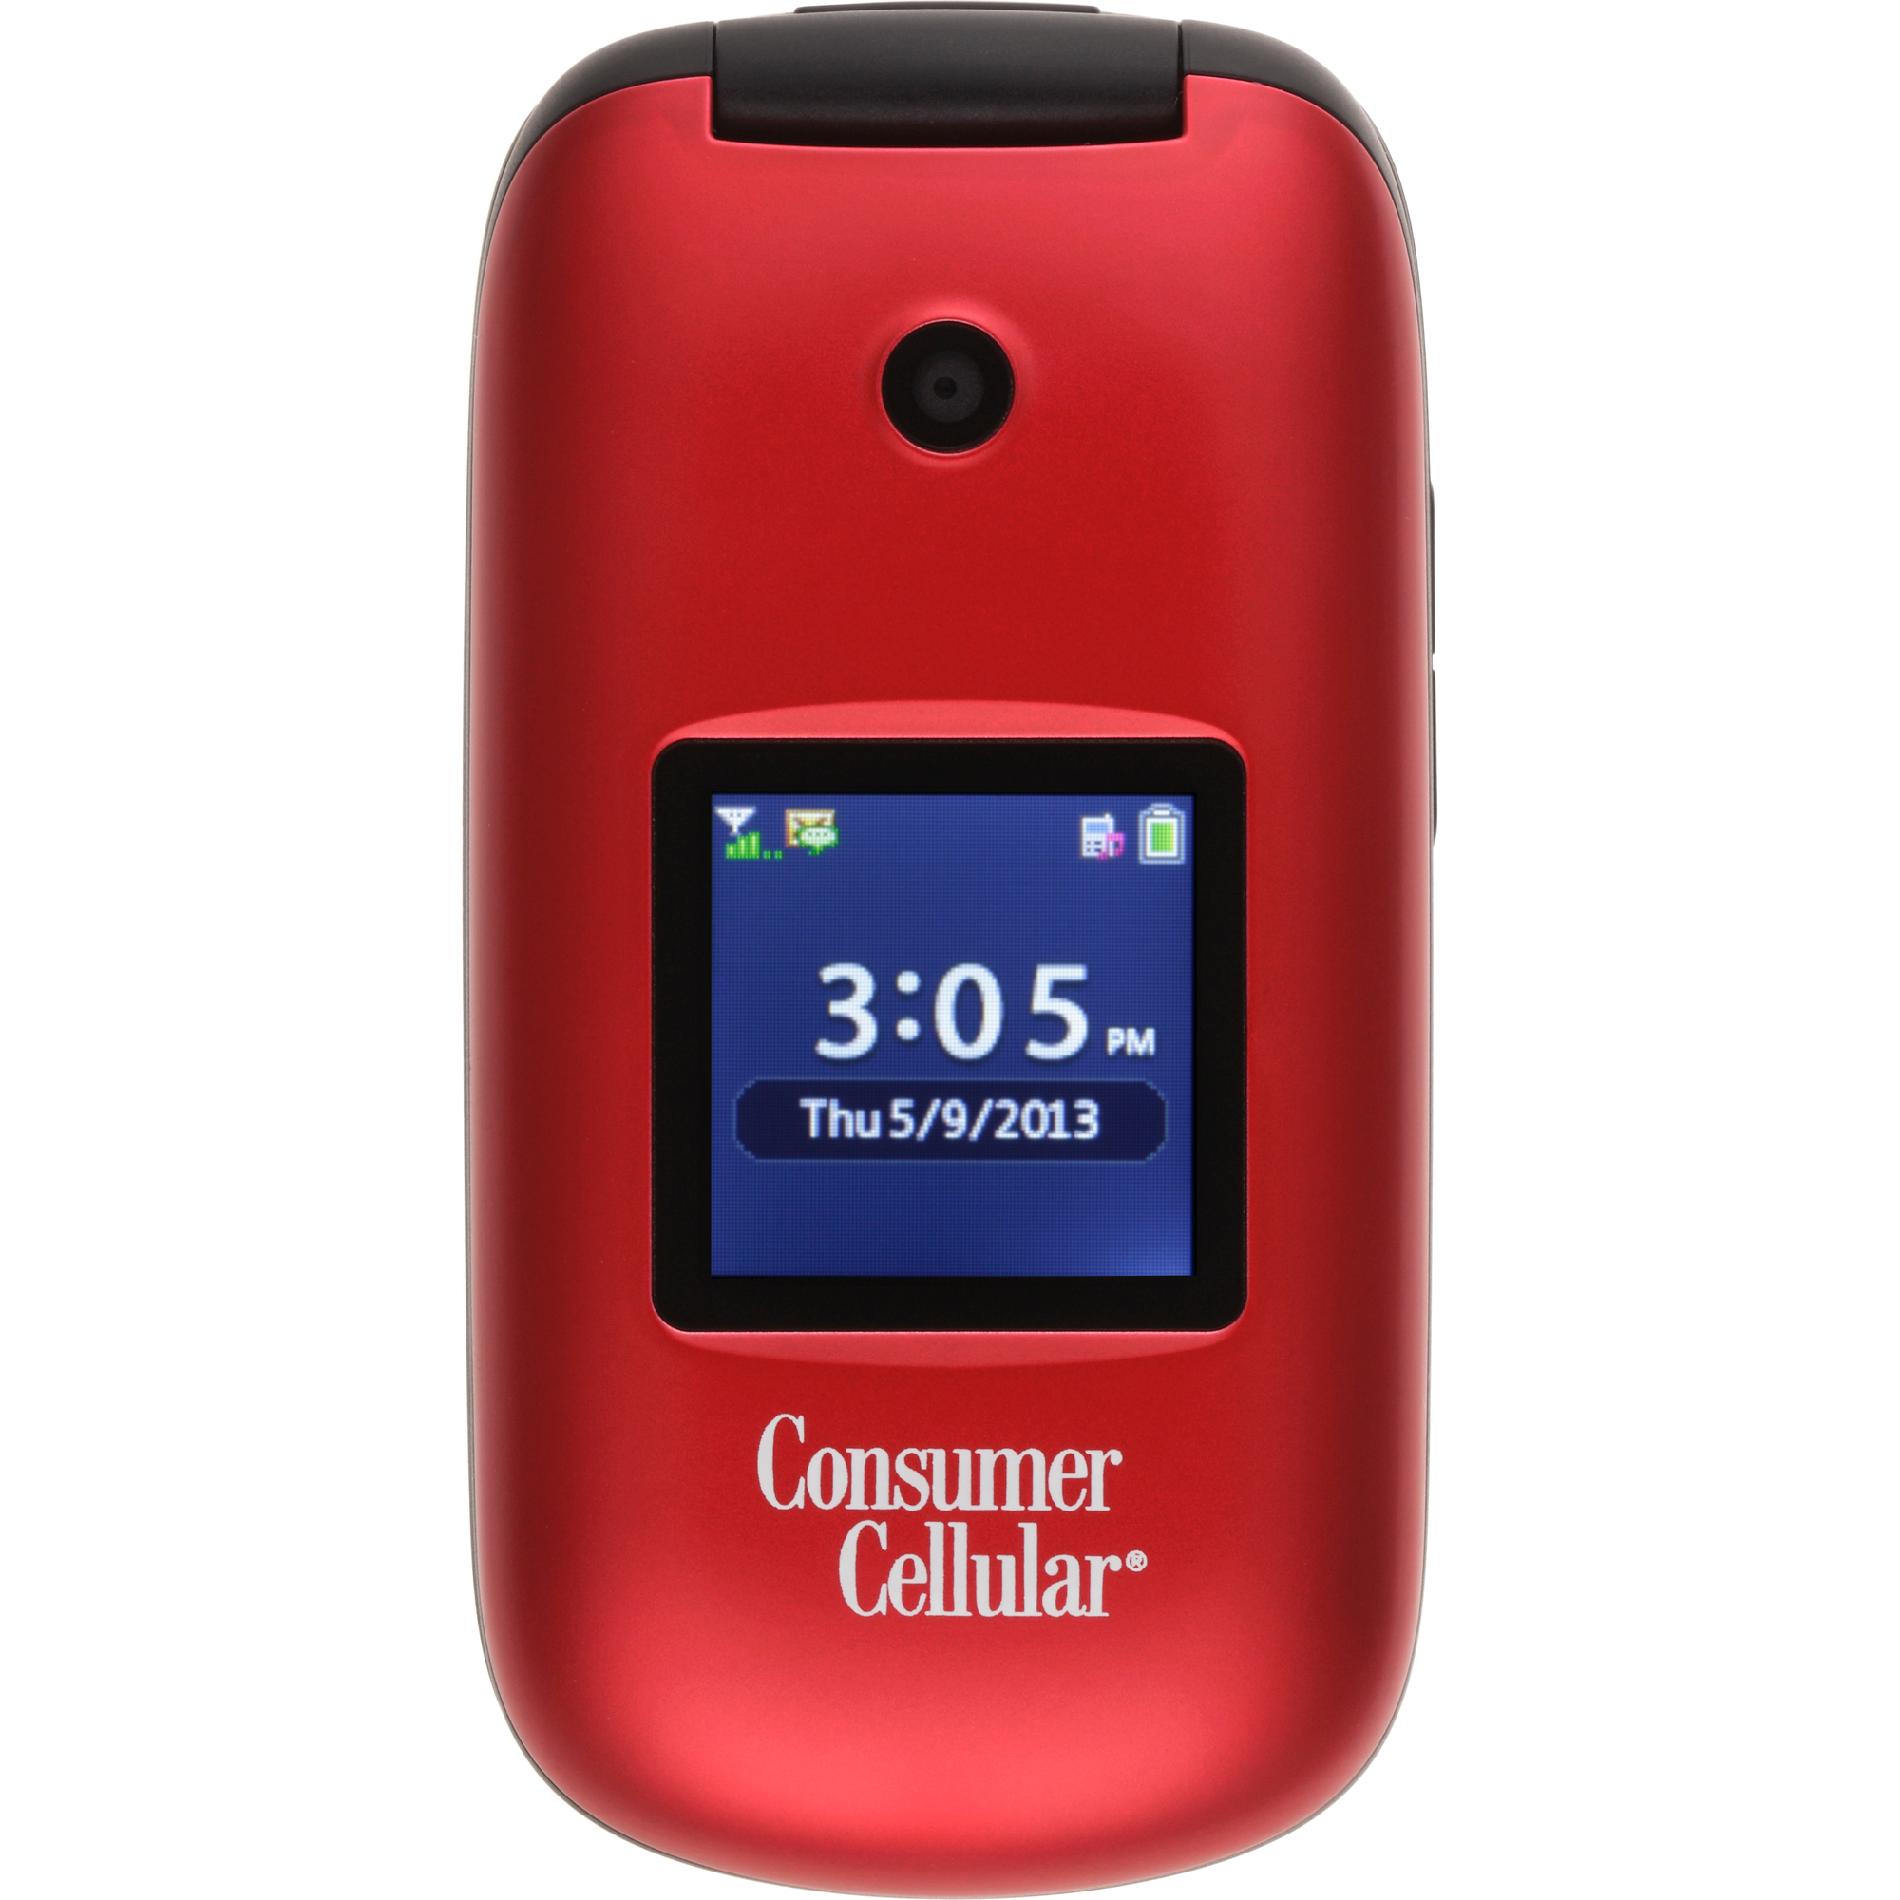 CELL PHONES THAT WORK WITH CONSUMER CELLULAR SERVICE